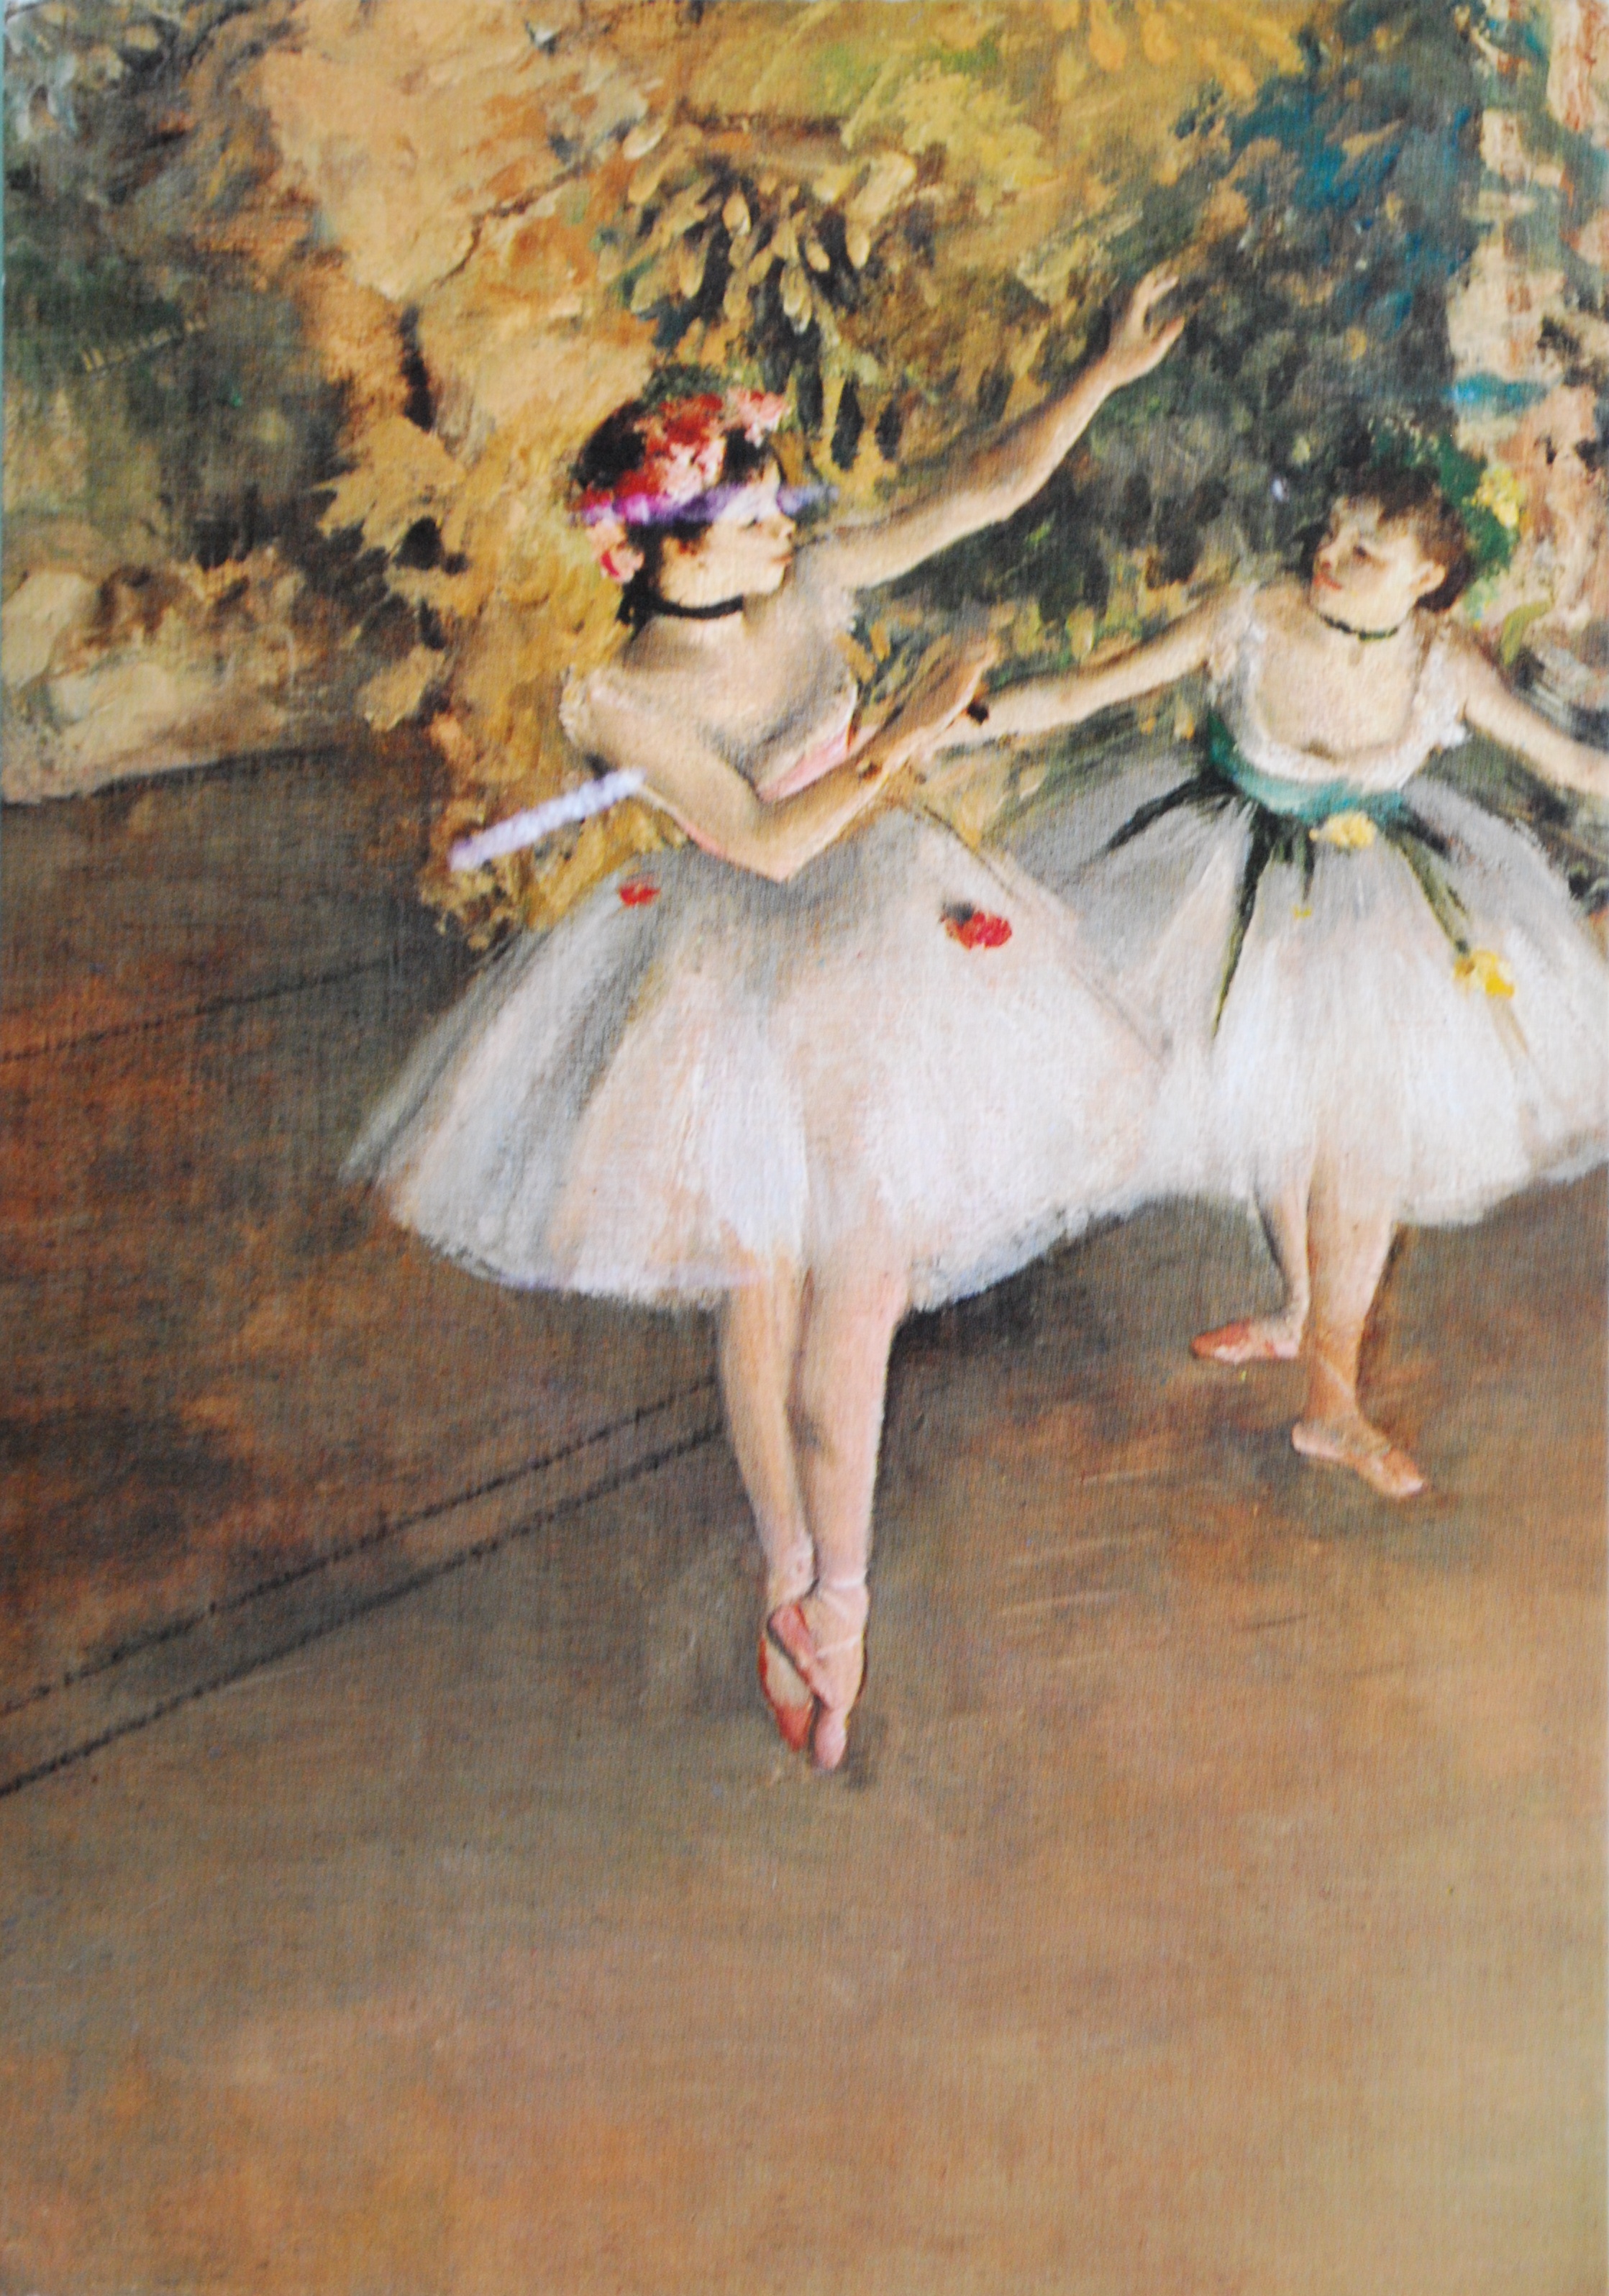 Portrait chinois des membres - Page 4 Two-dancers-on-stage-by-degas-von-ikamuur-fi